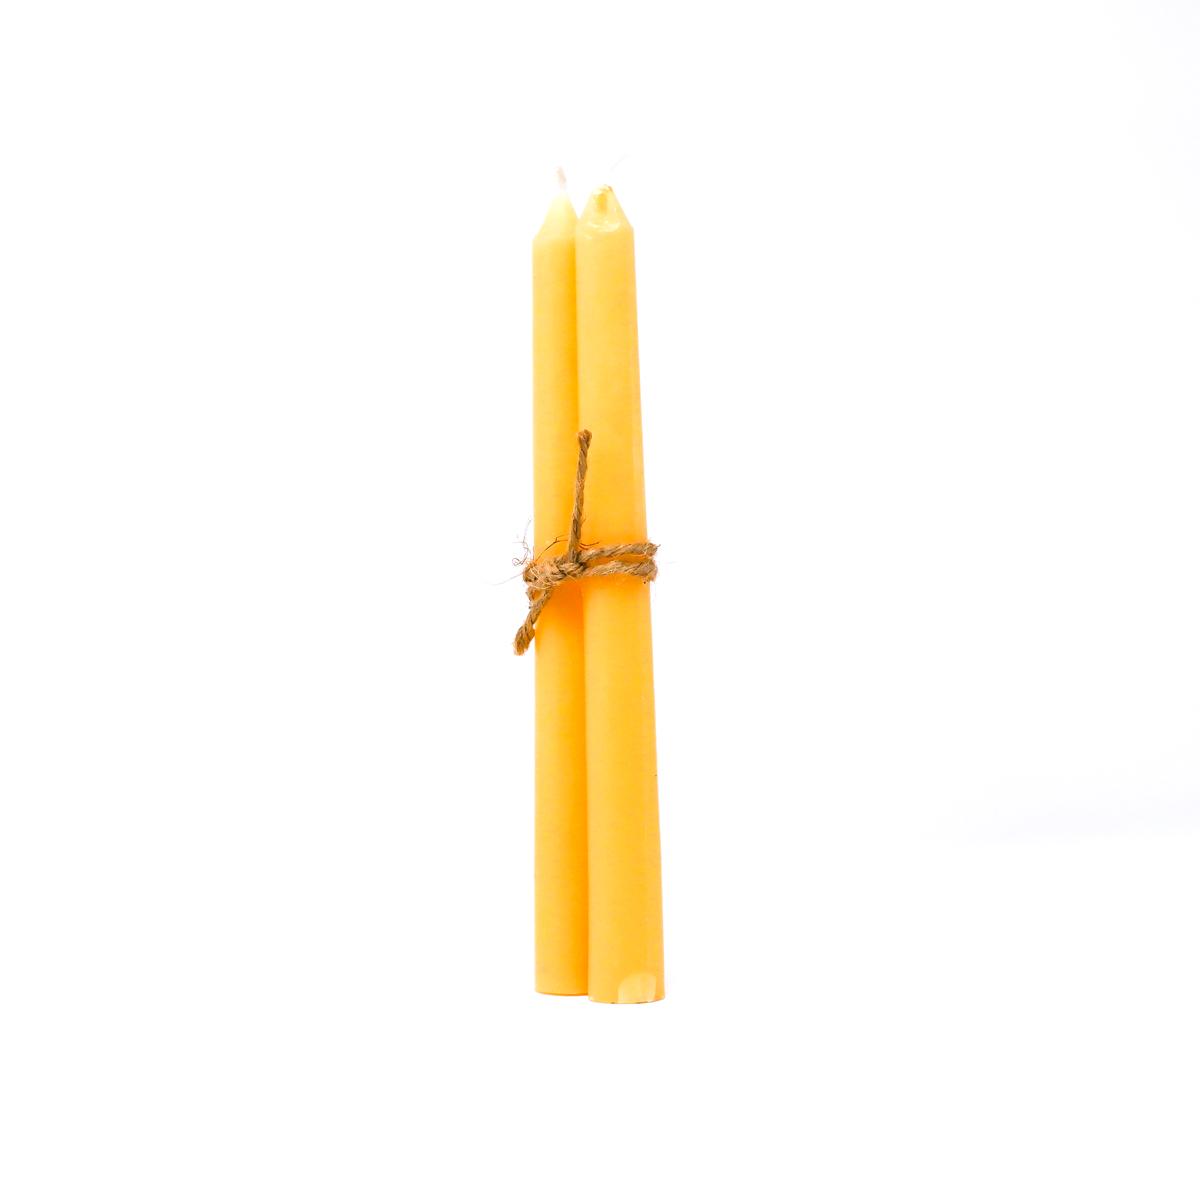 Beeswax Poured Taper Candles – Pair